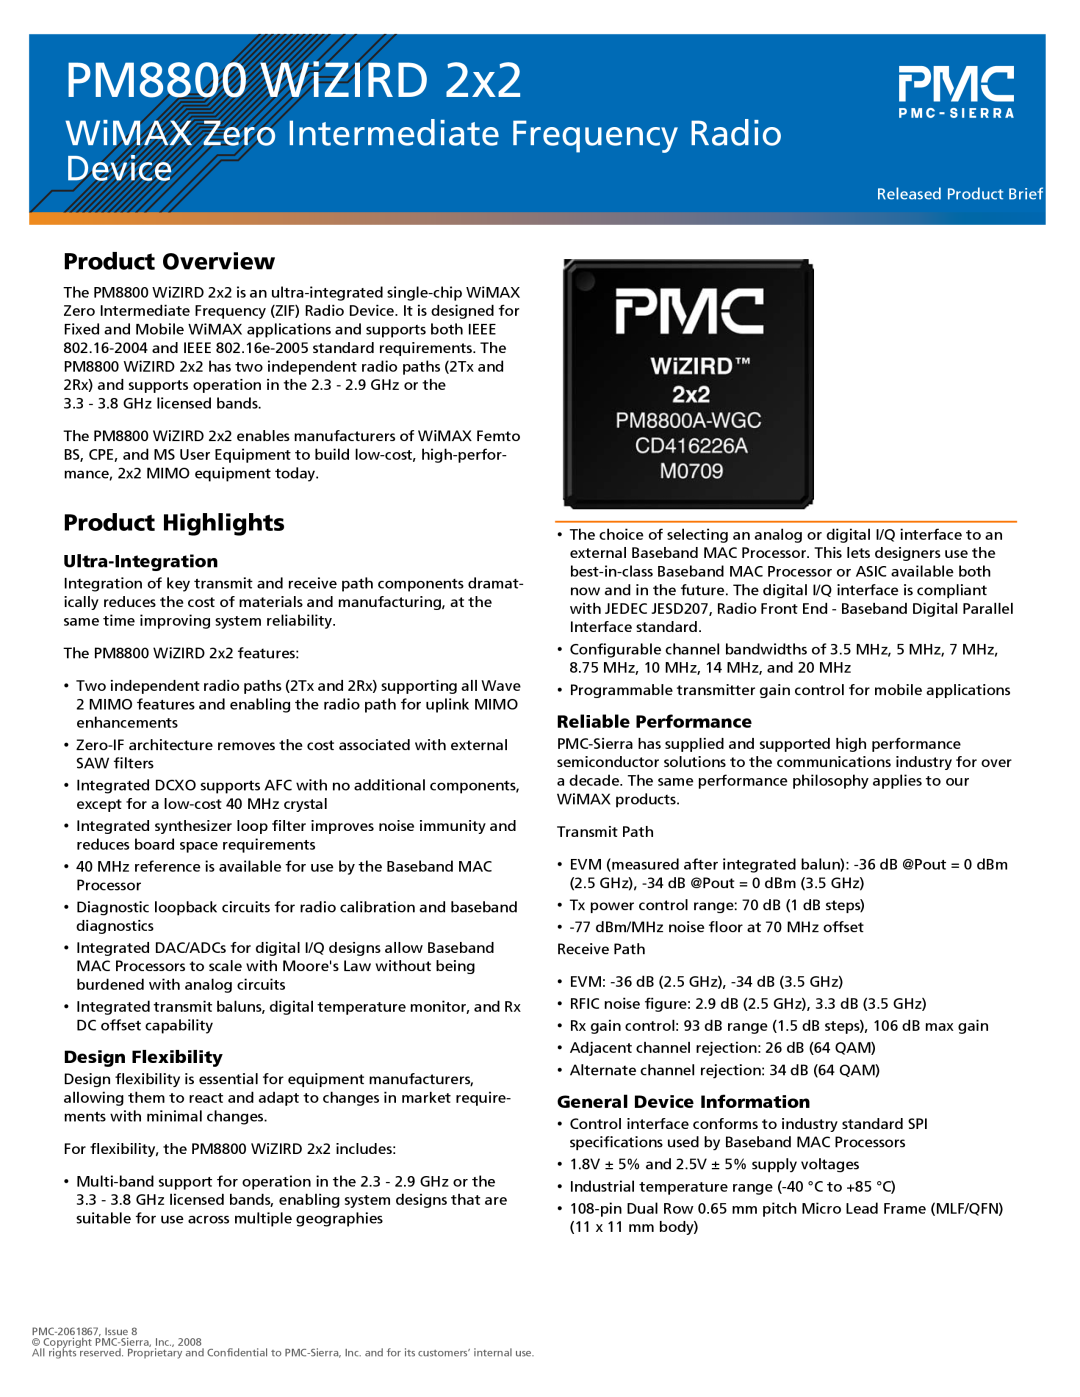 PMC-Sierra specifications Product Overview, Product Highlights, PM8800 WiZIRD, Ultra-Integration, Design Flexibility 